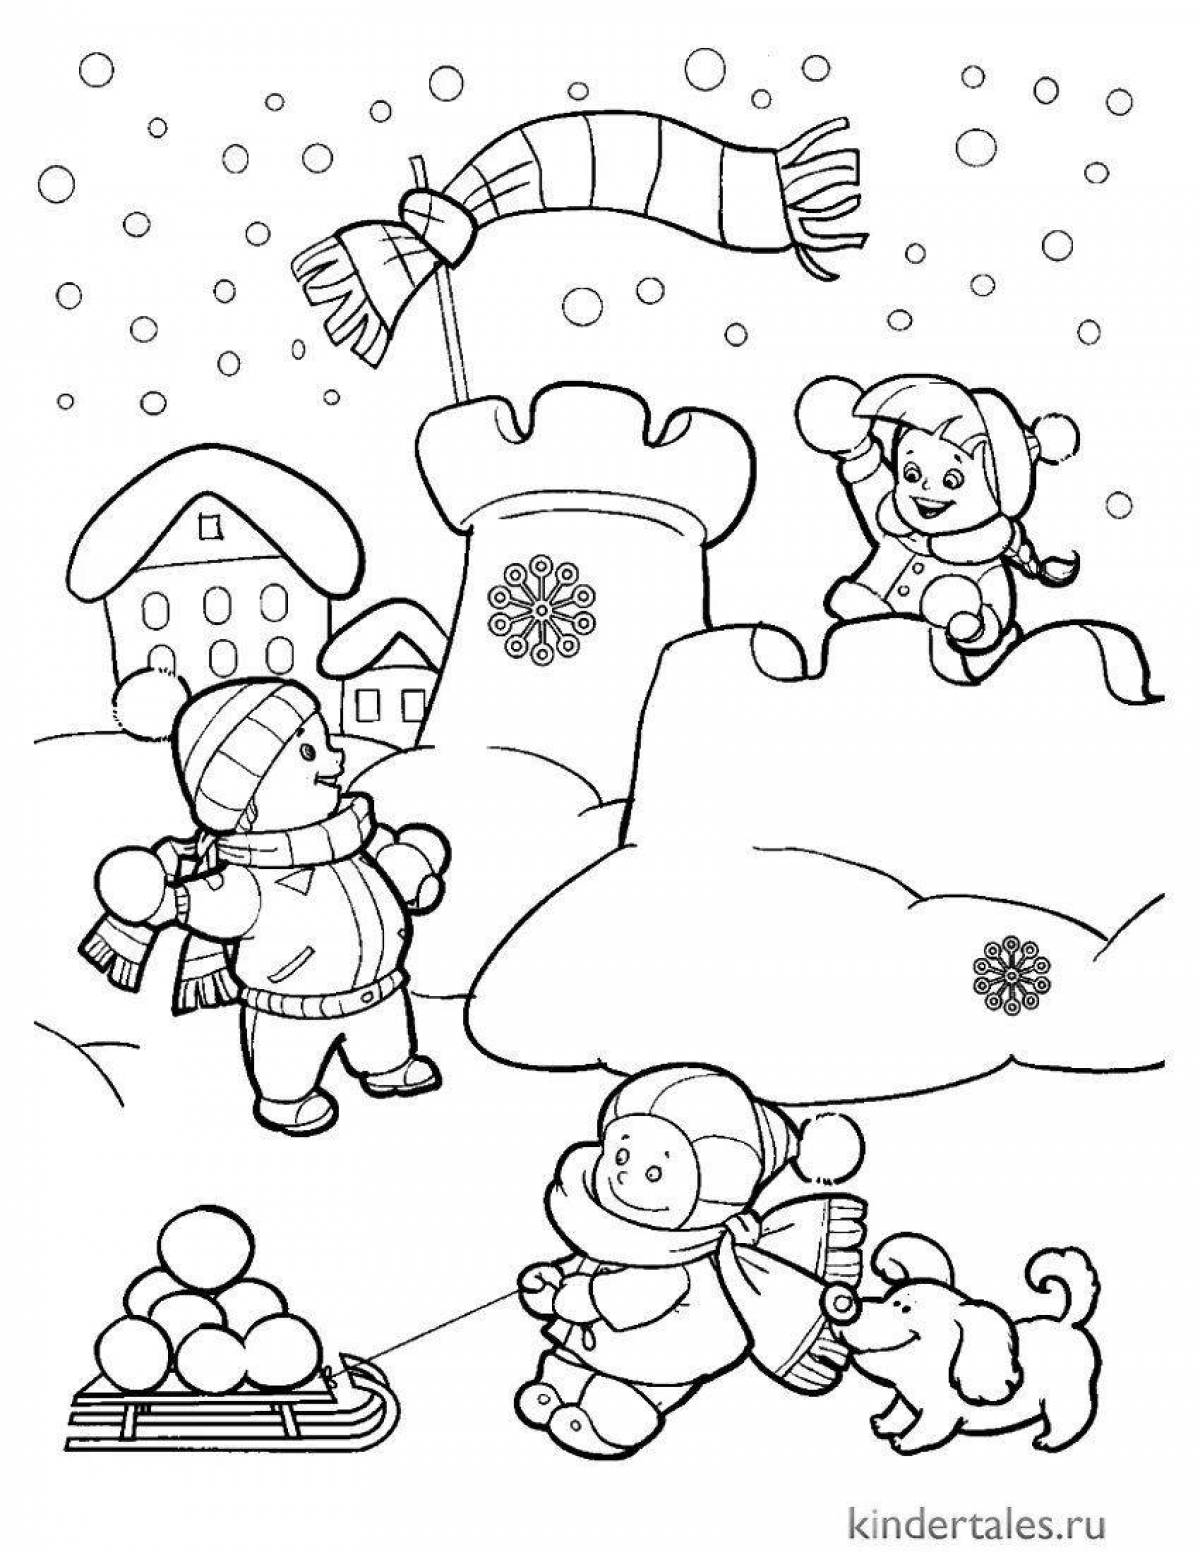 Playful winter coloring book for 4-5 year olds